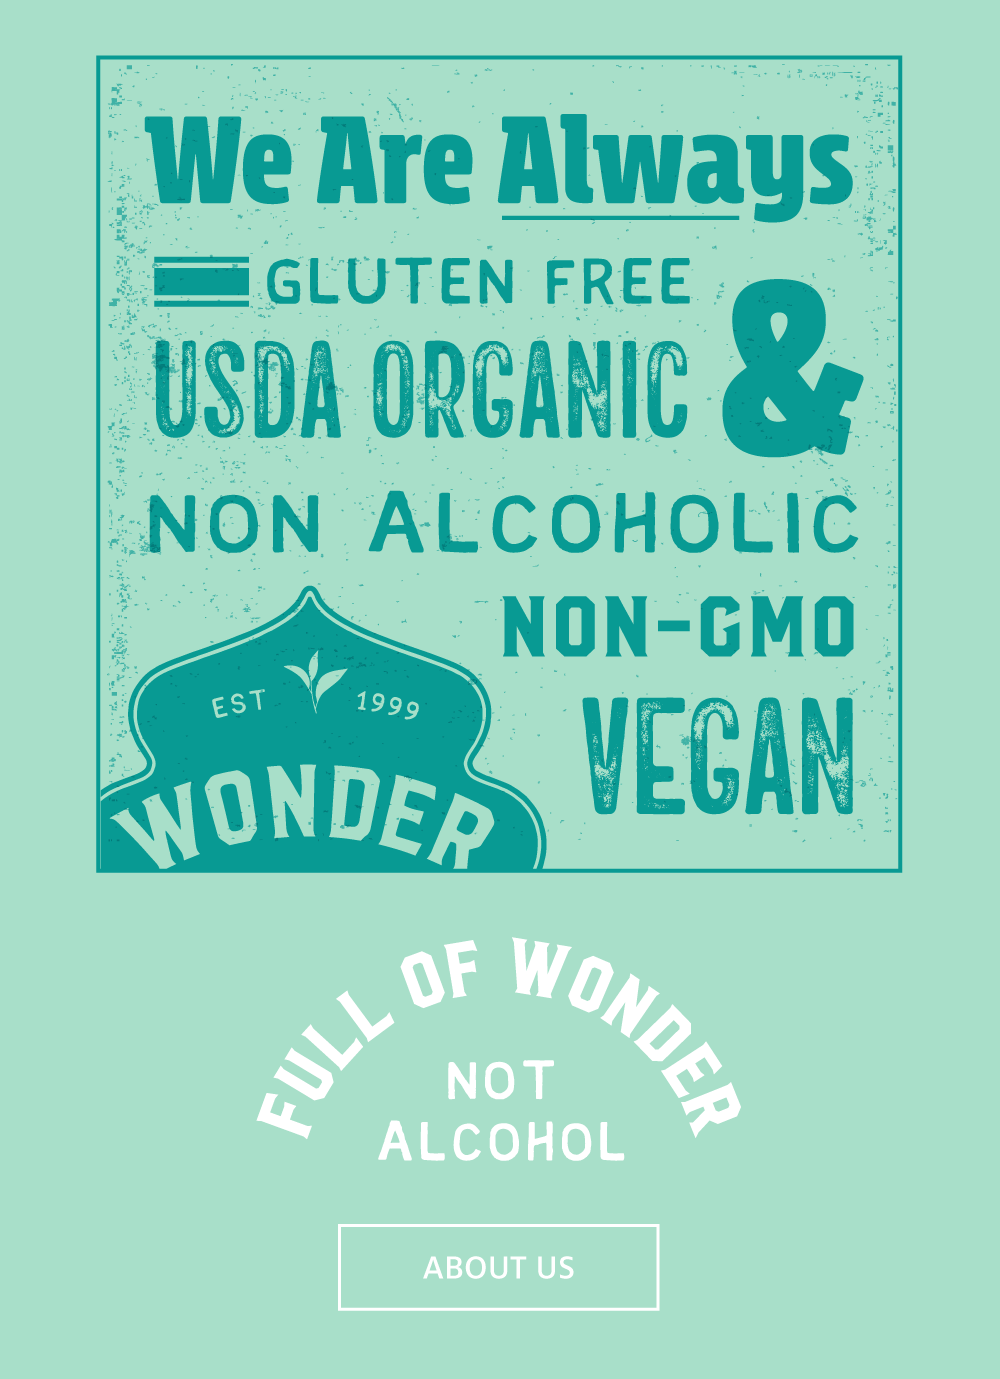 text that reads we are always gluten free usda organic & non-alcoholic non-gmo vegan in a text box above additional text that reads full of wonder not alcohol with button that says about us below